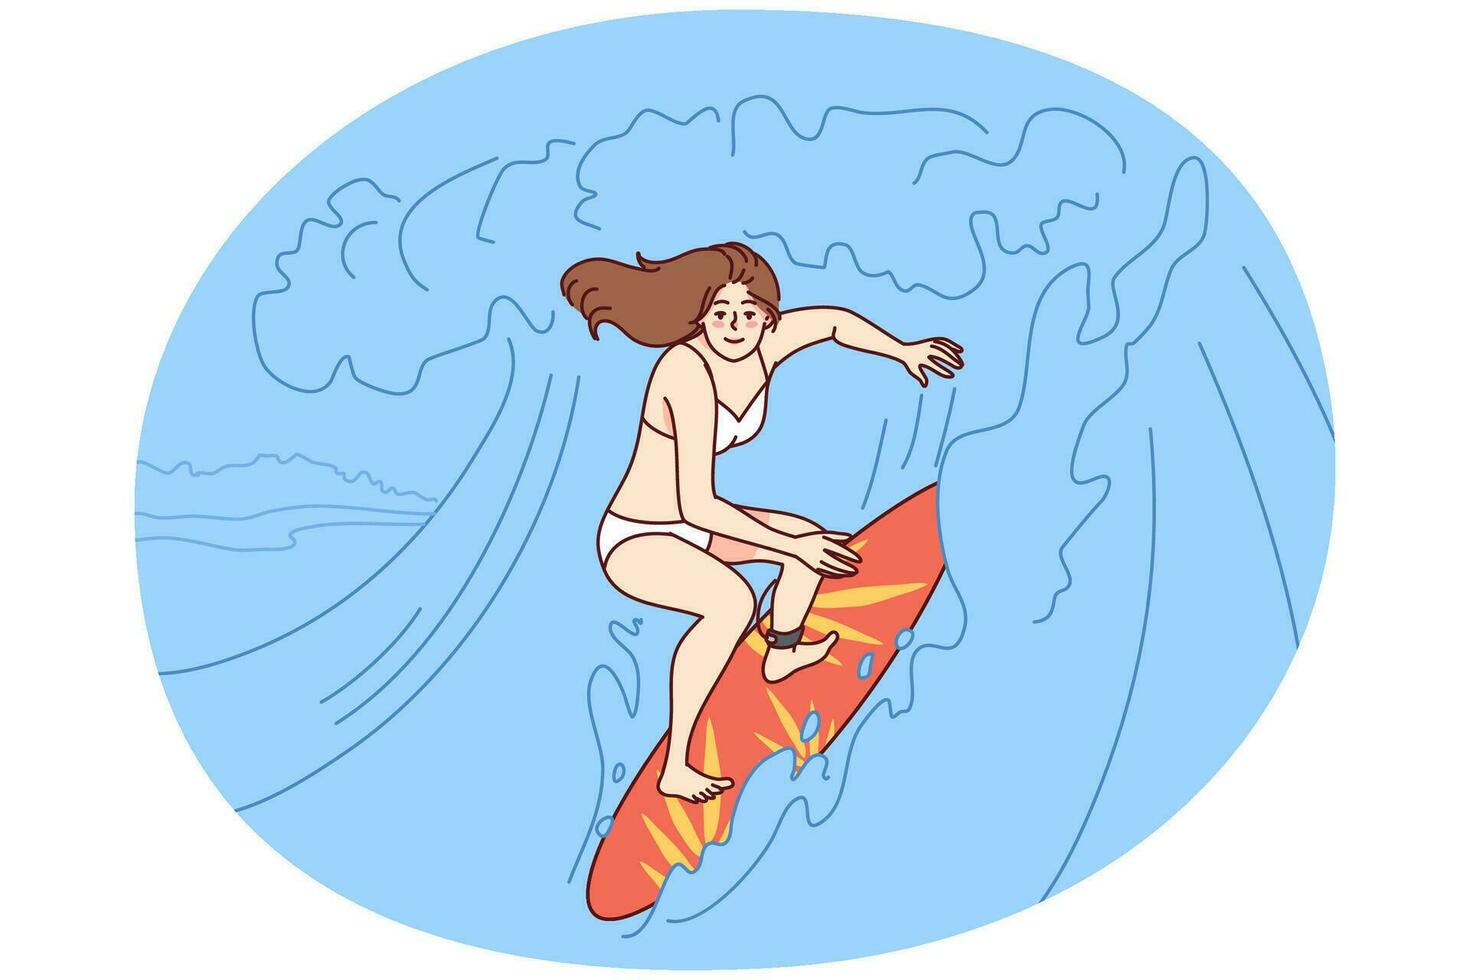 Happy woman in bikini surfing on waves in ocean on board. Smiling active female surfer have fun enjoy summer vacation. Vector illustration.